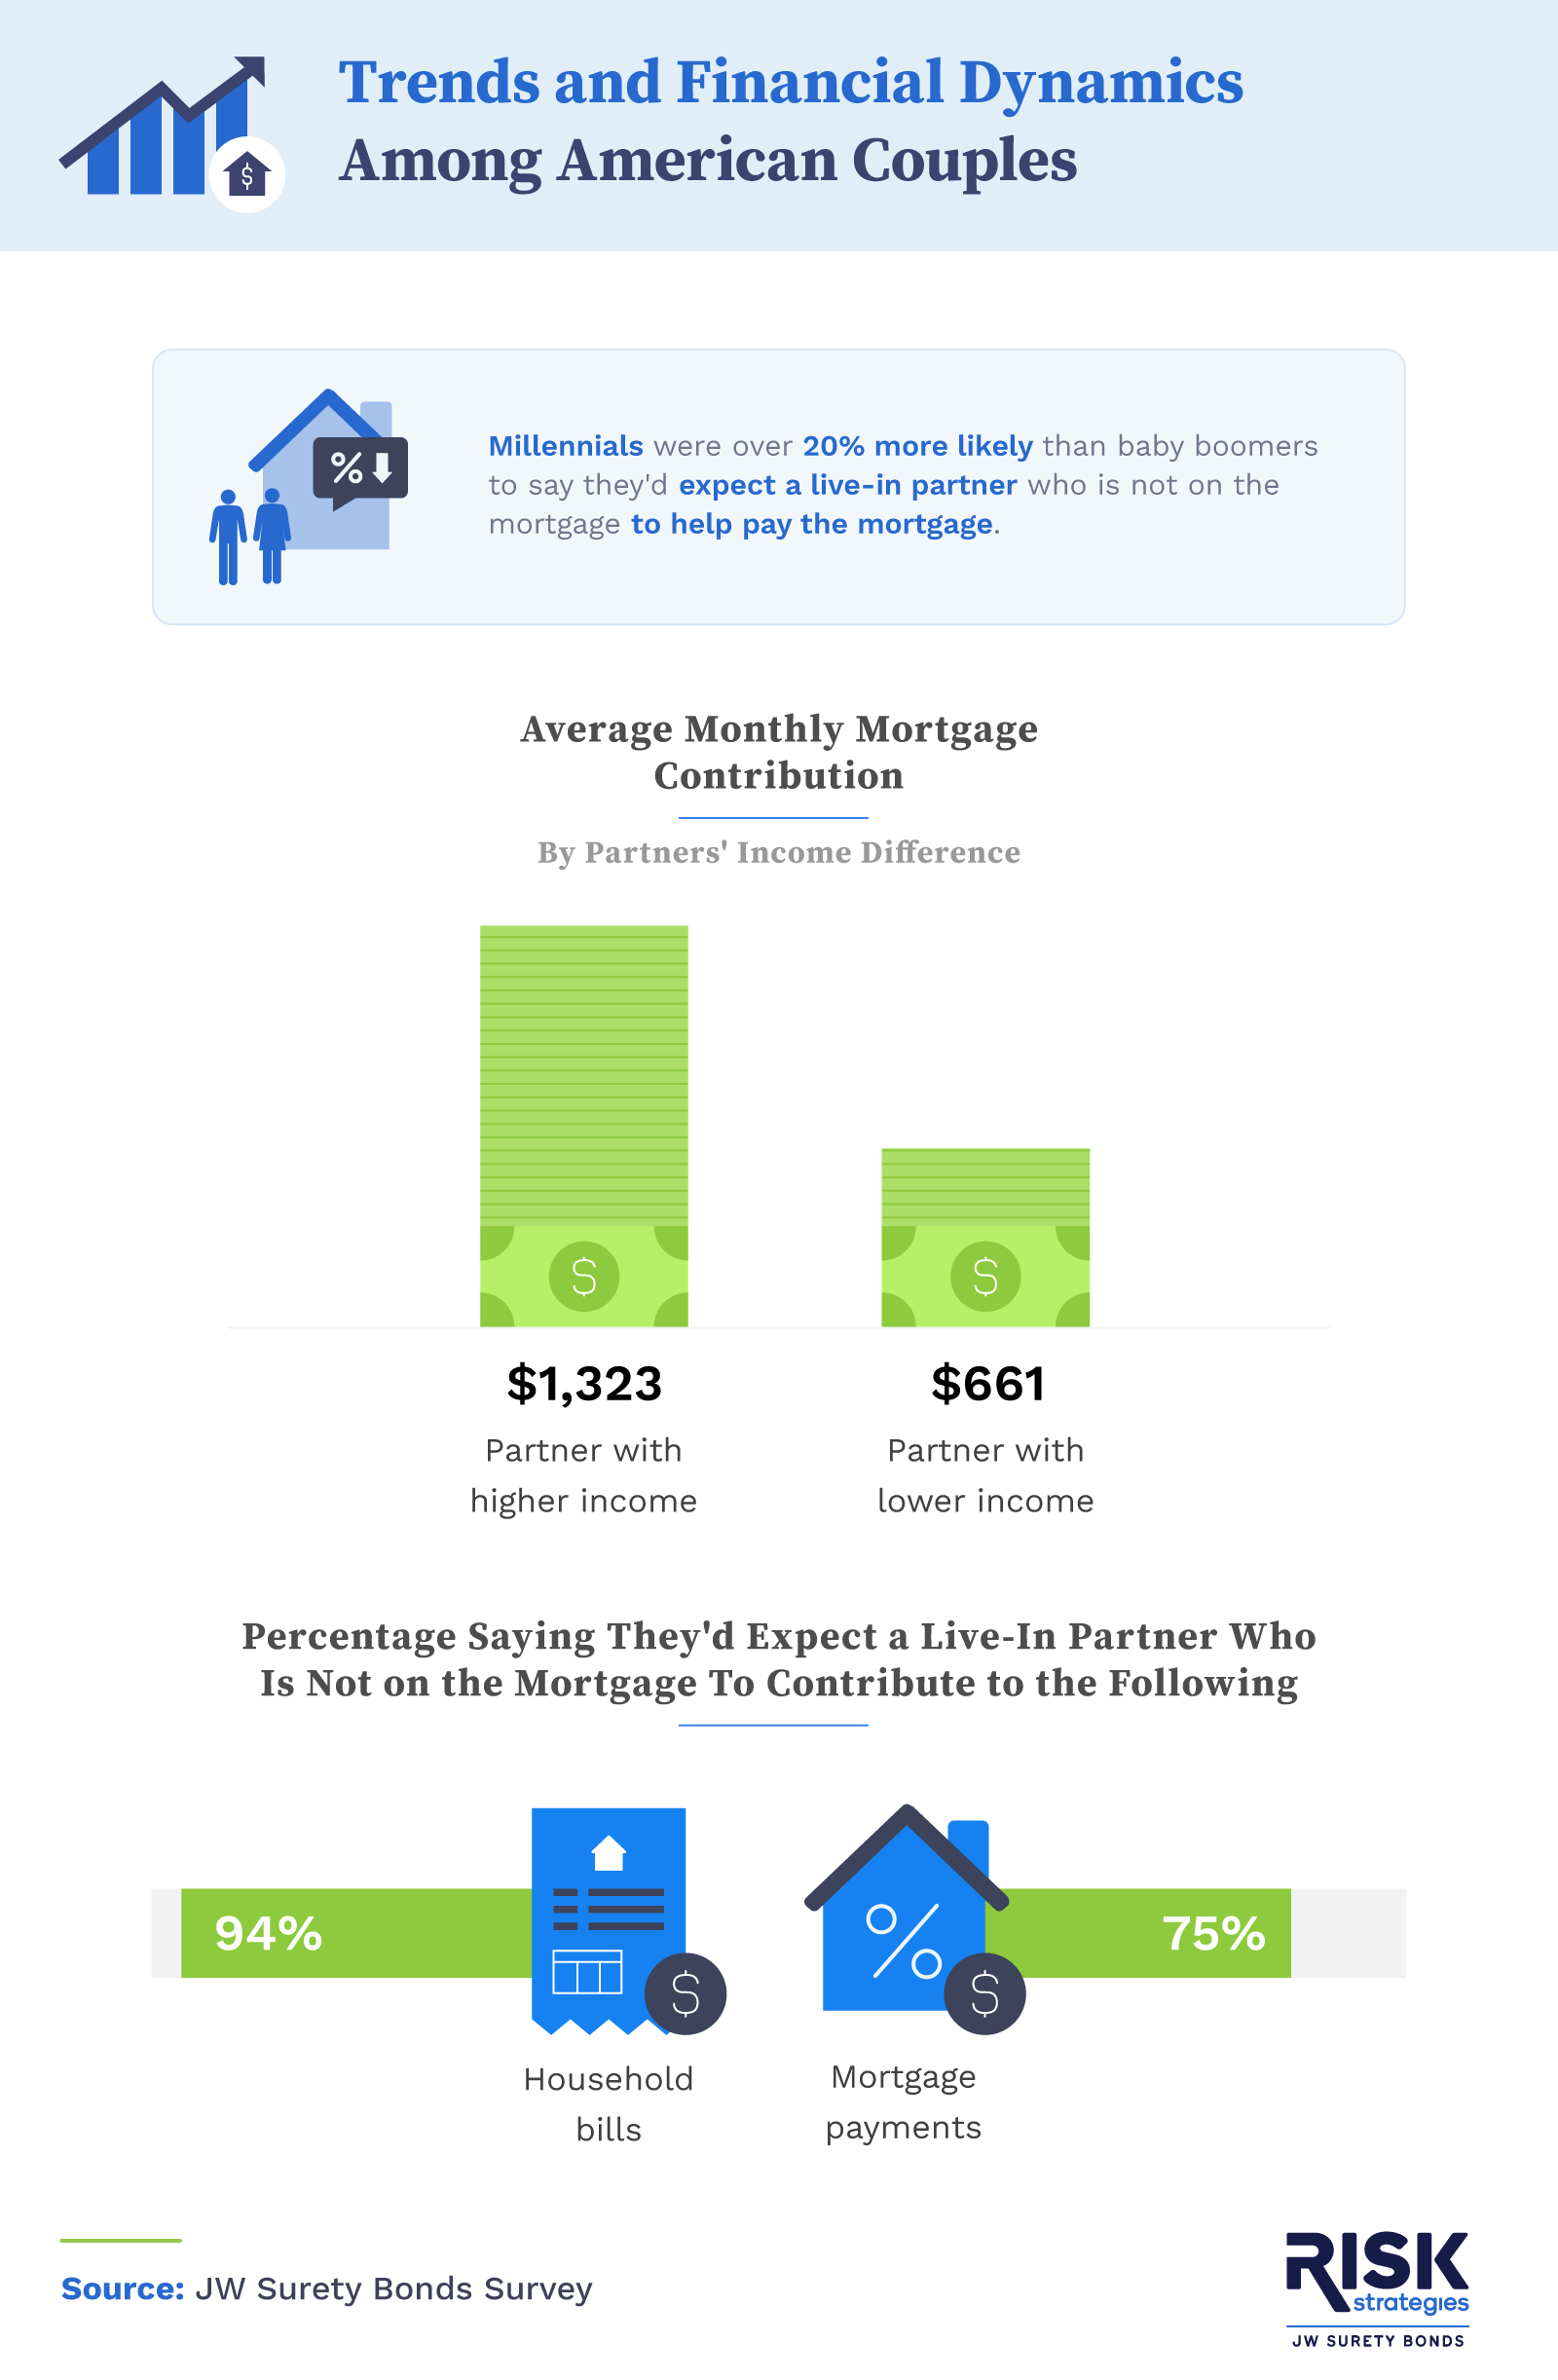 Trends and financial dynamics among American couples.